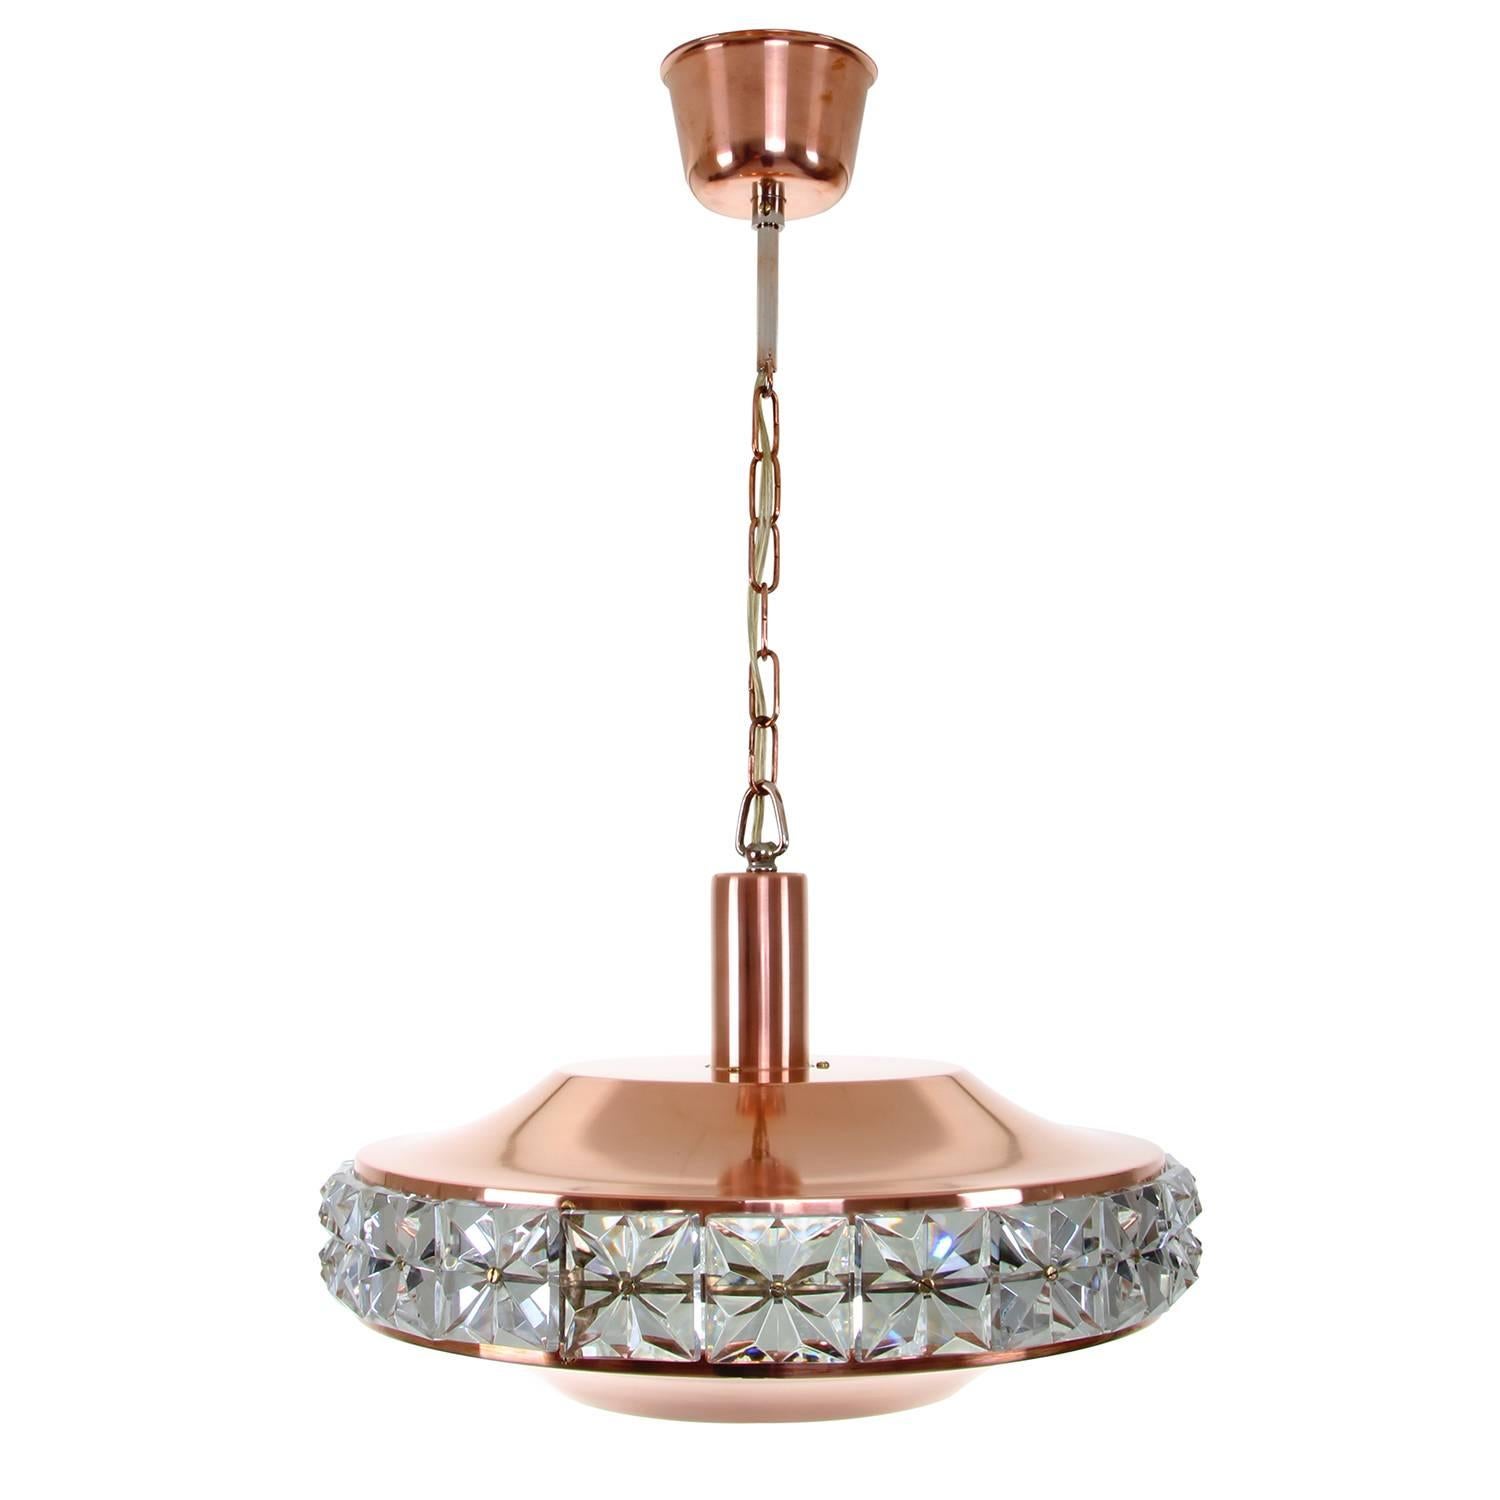 Copper and Crystal Pendant by Vitrika, 1960s, Danish Modern Copper Ceiling Light